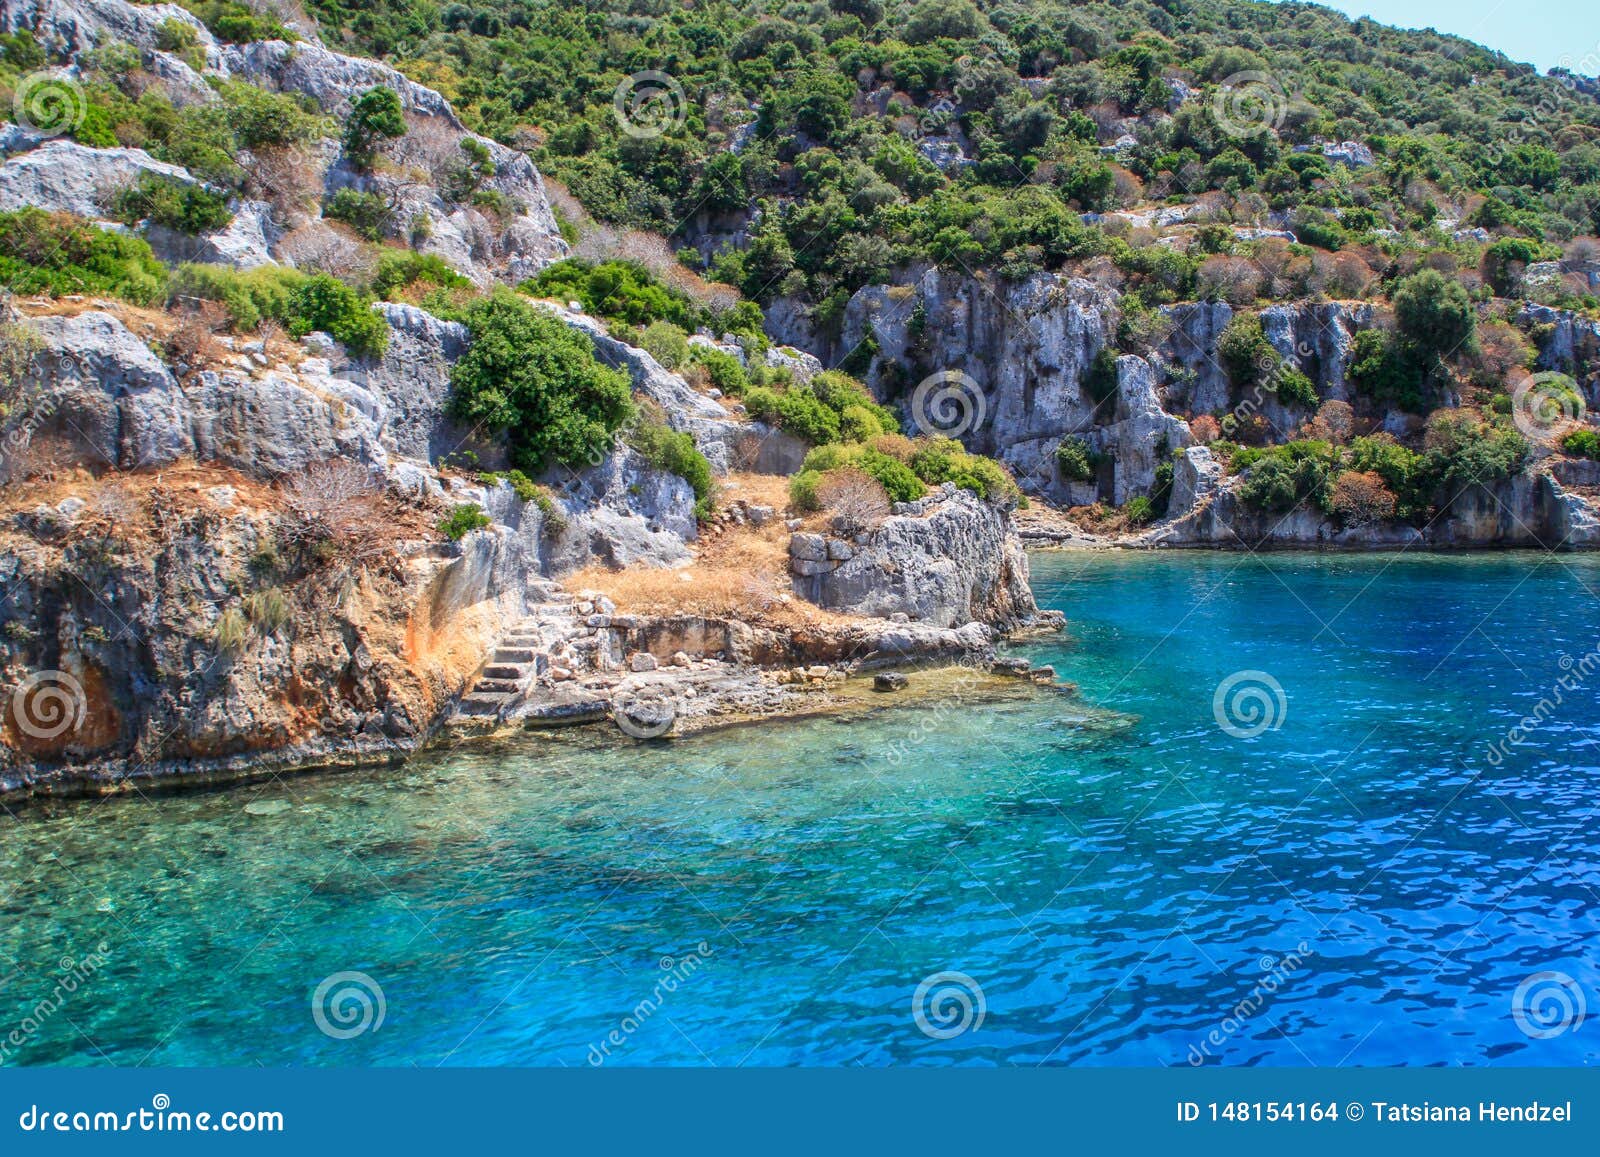 rocks and bright turquoise water in the mediterranean sea. ruins of an ancient city in bodrum